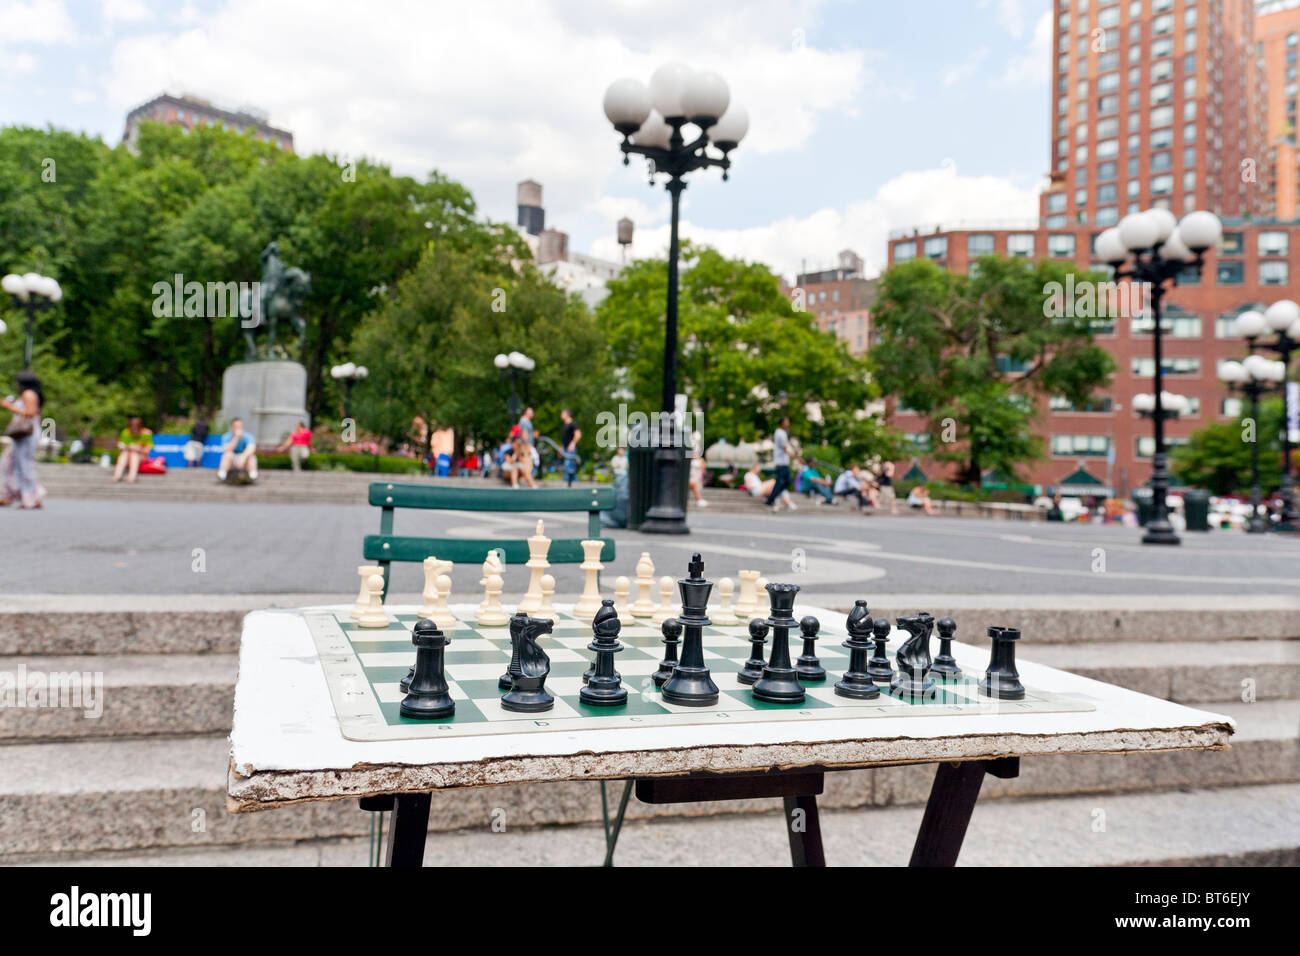 Schach in Union Square Park in New York City. Stockfoto